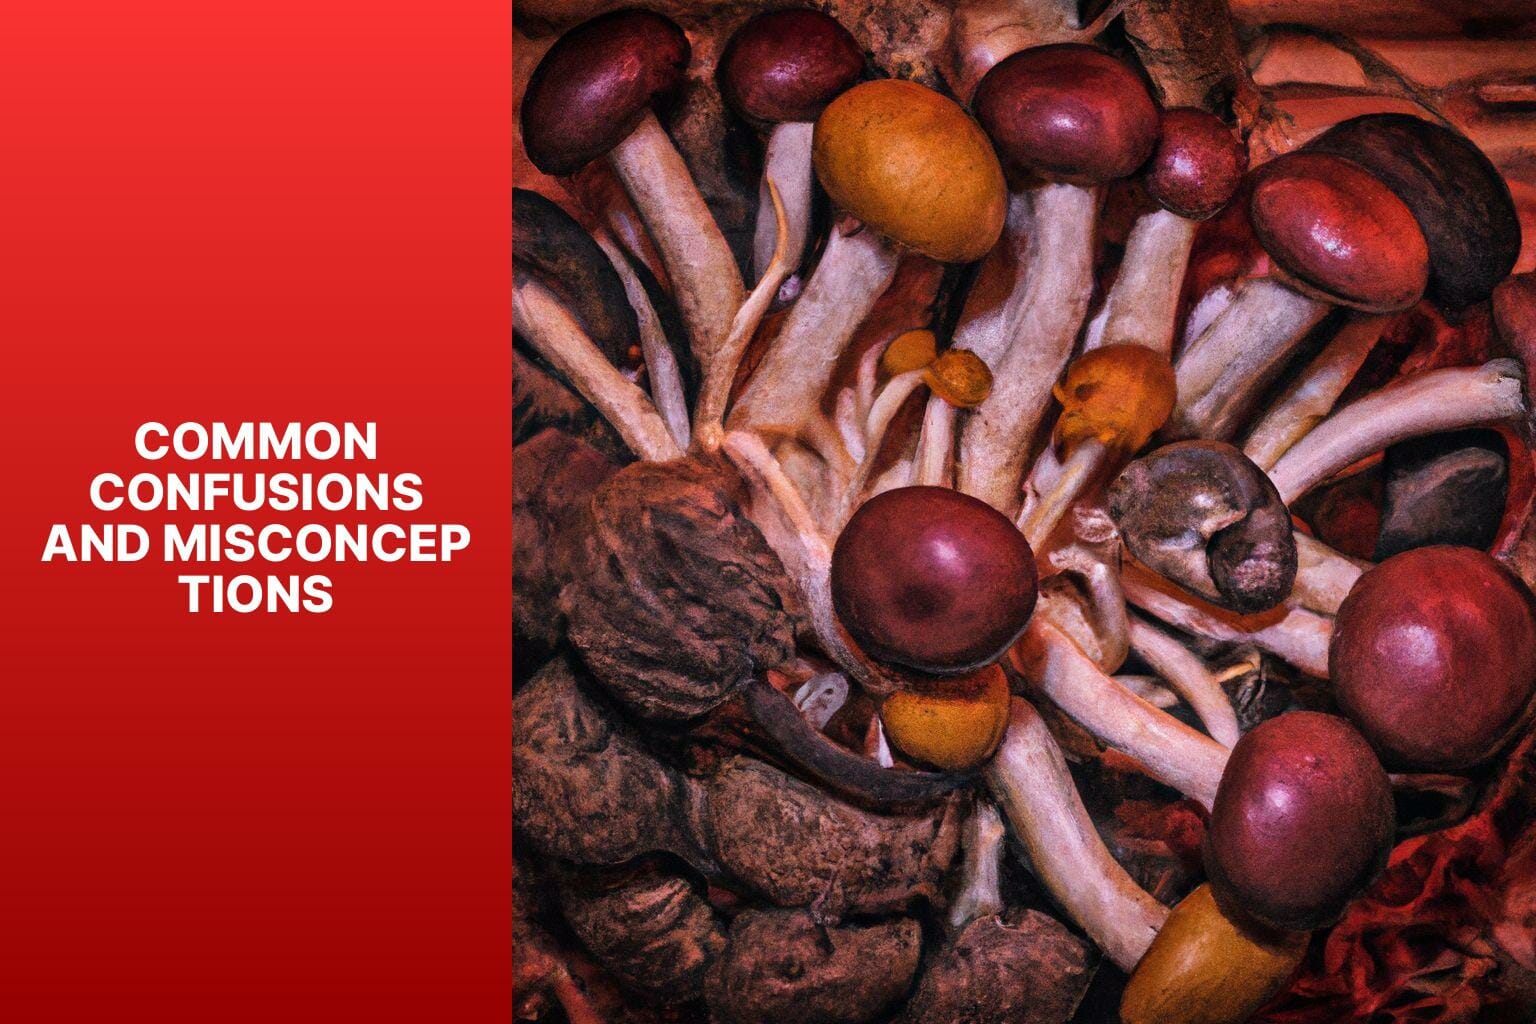 Common Confusions and Misconceptions - Are Mushrooms Vegetables? Let